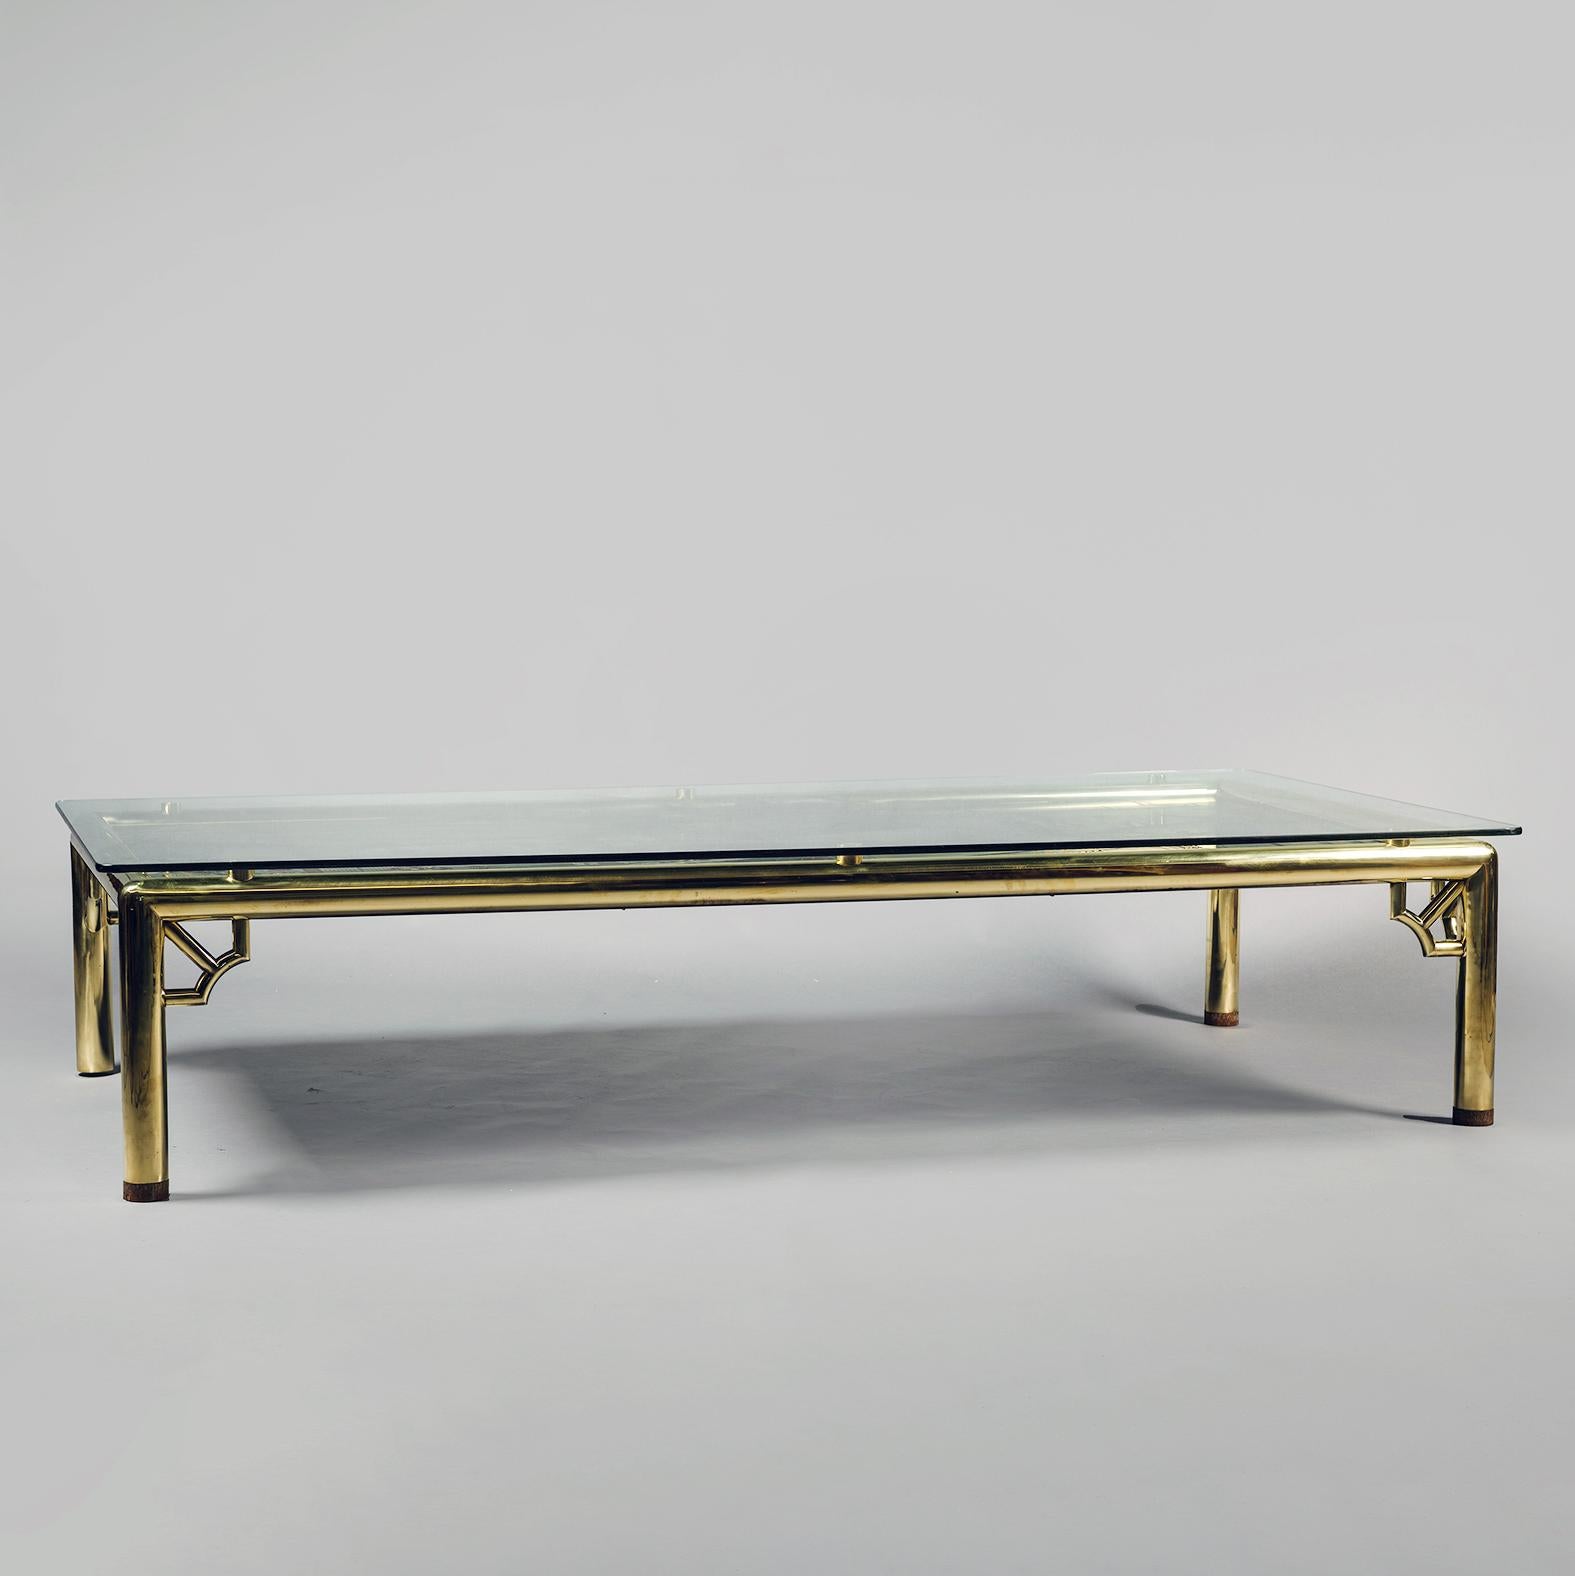 A Very Large Chinoiserie Lacquer, Polished Brass and Glass Coffee Table. In the manner of Maison Jansen. 

The glass top above a Chinese-style 'Coromandel lacquer' panel. The tubular brass frame and legs joined by pagoda-like angle brackets.

Most